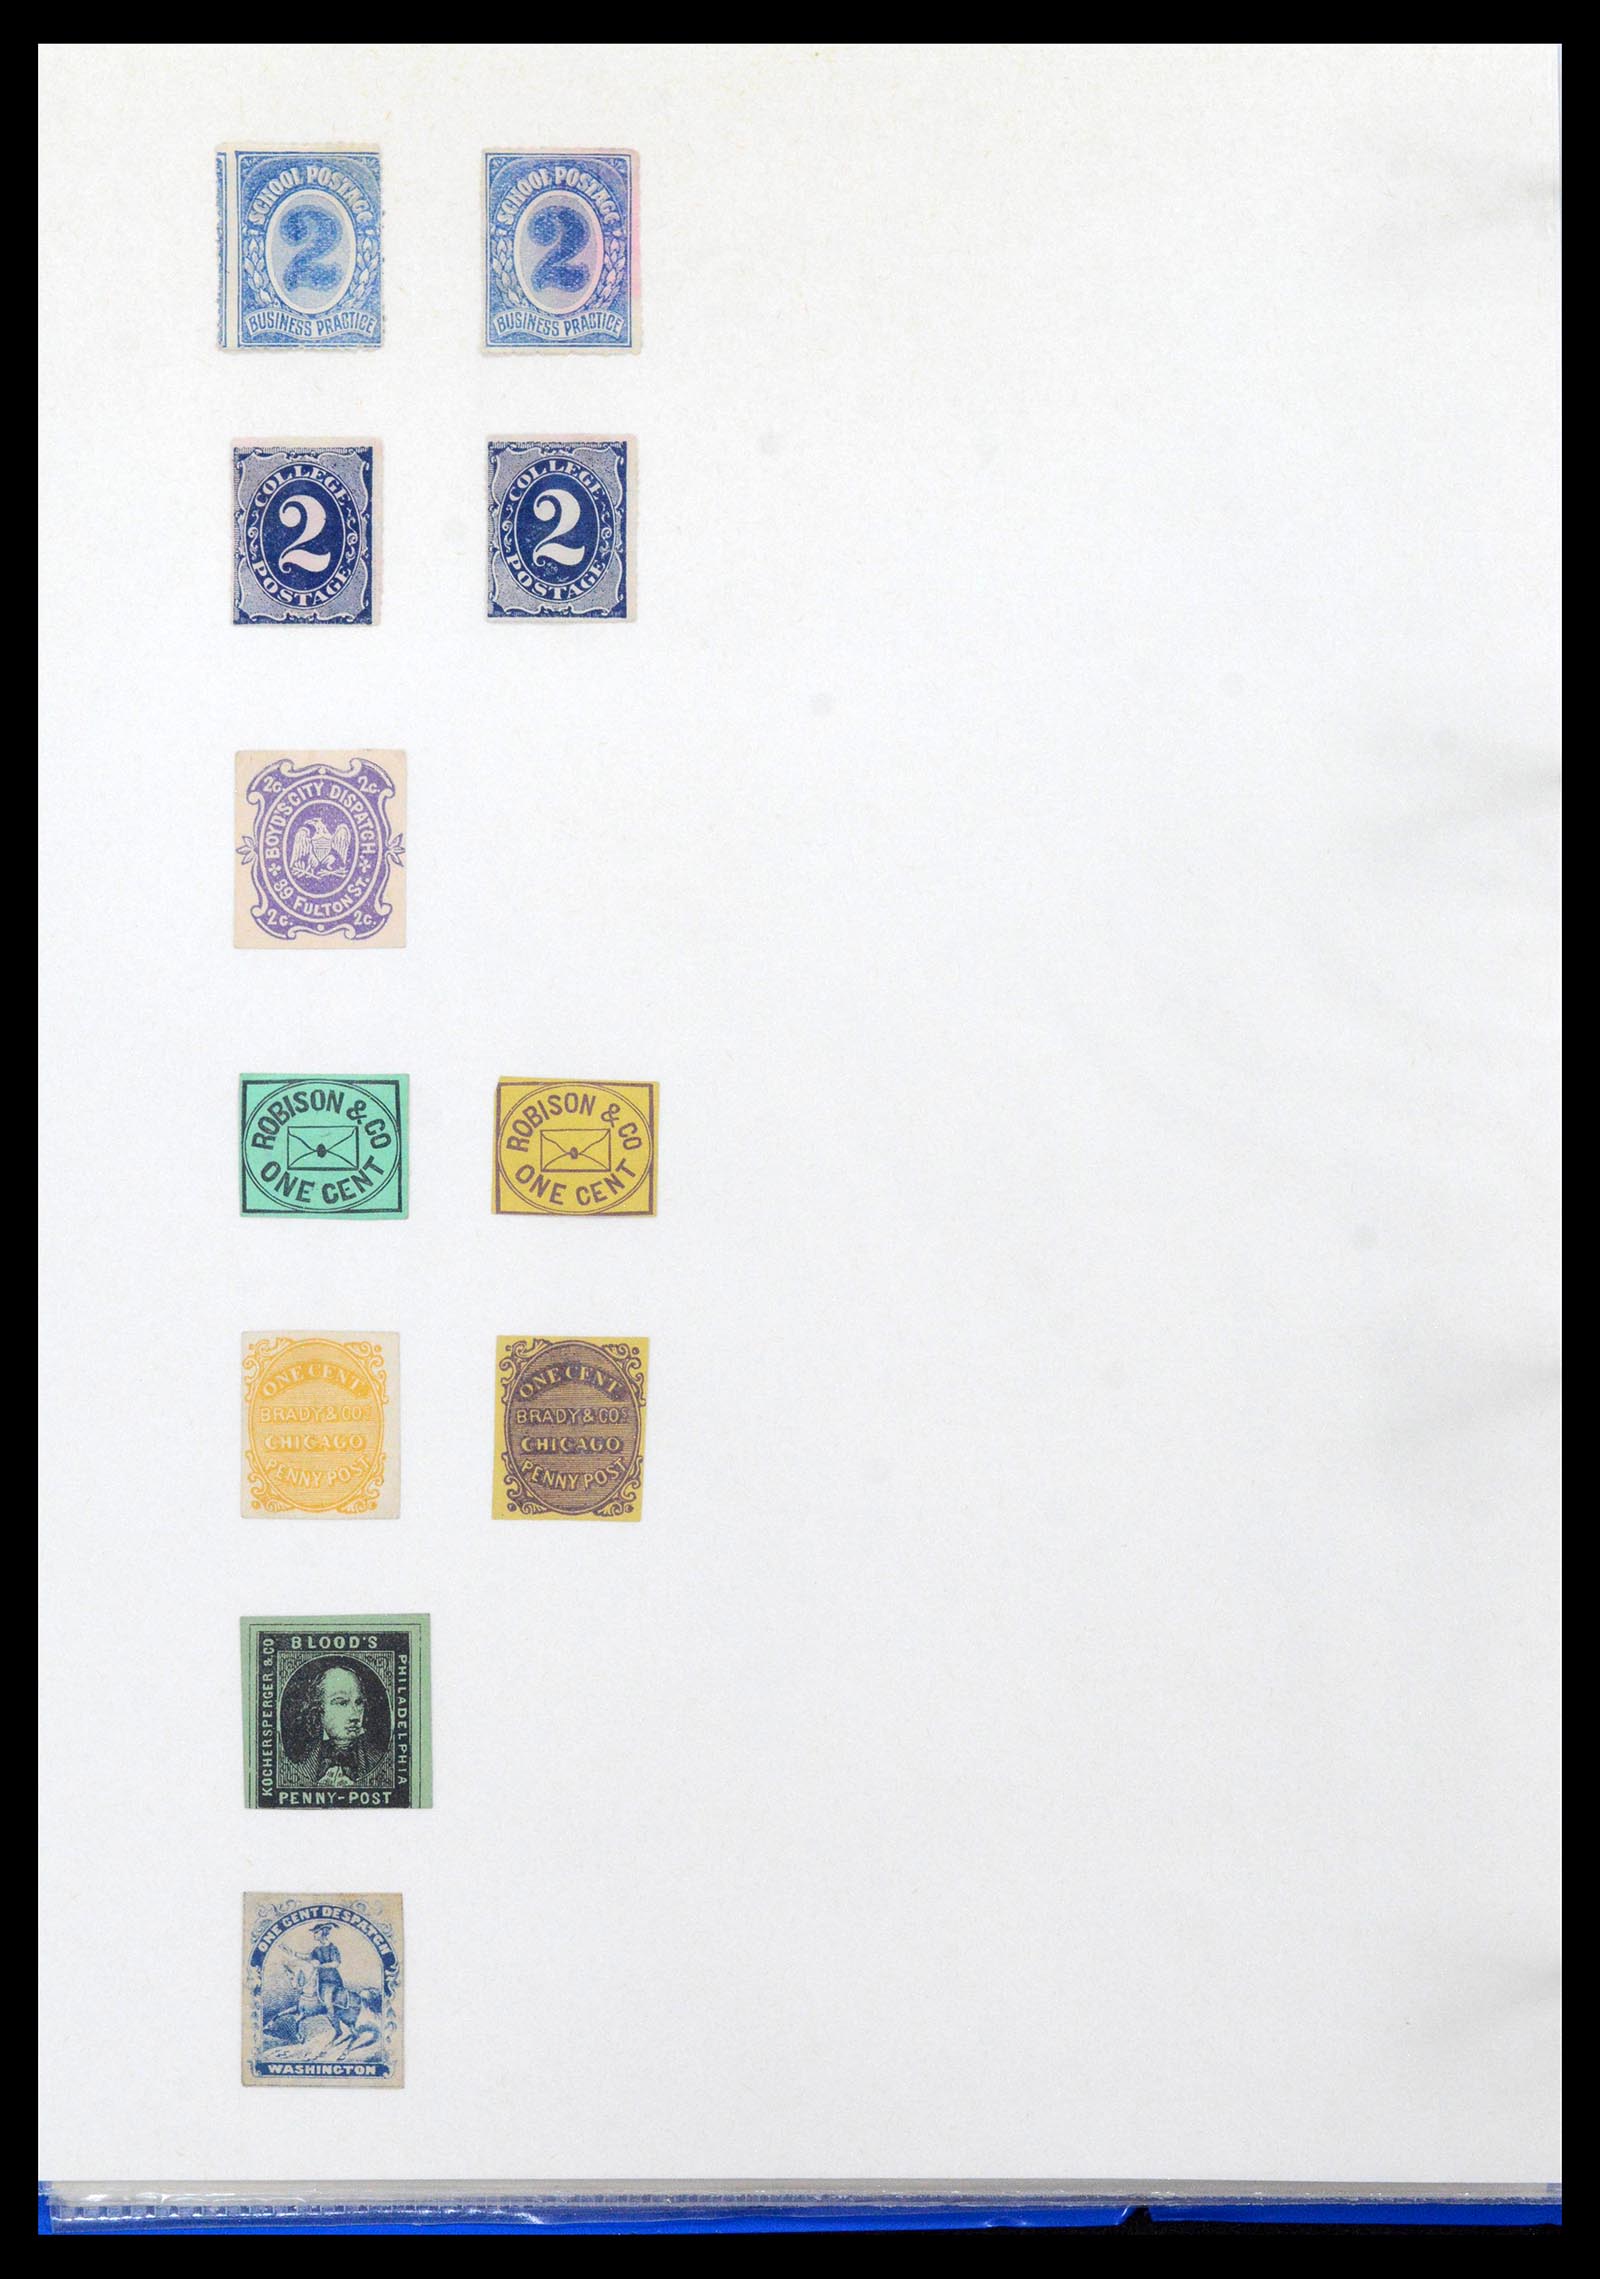 39374 0008 - Stamp collection 39374 USA locals 1850-1880.